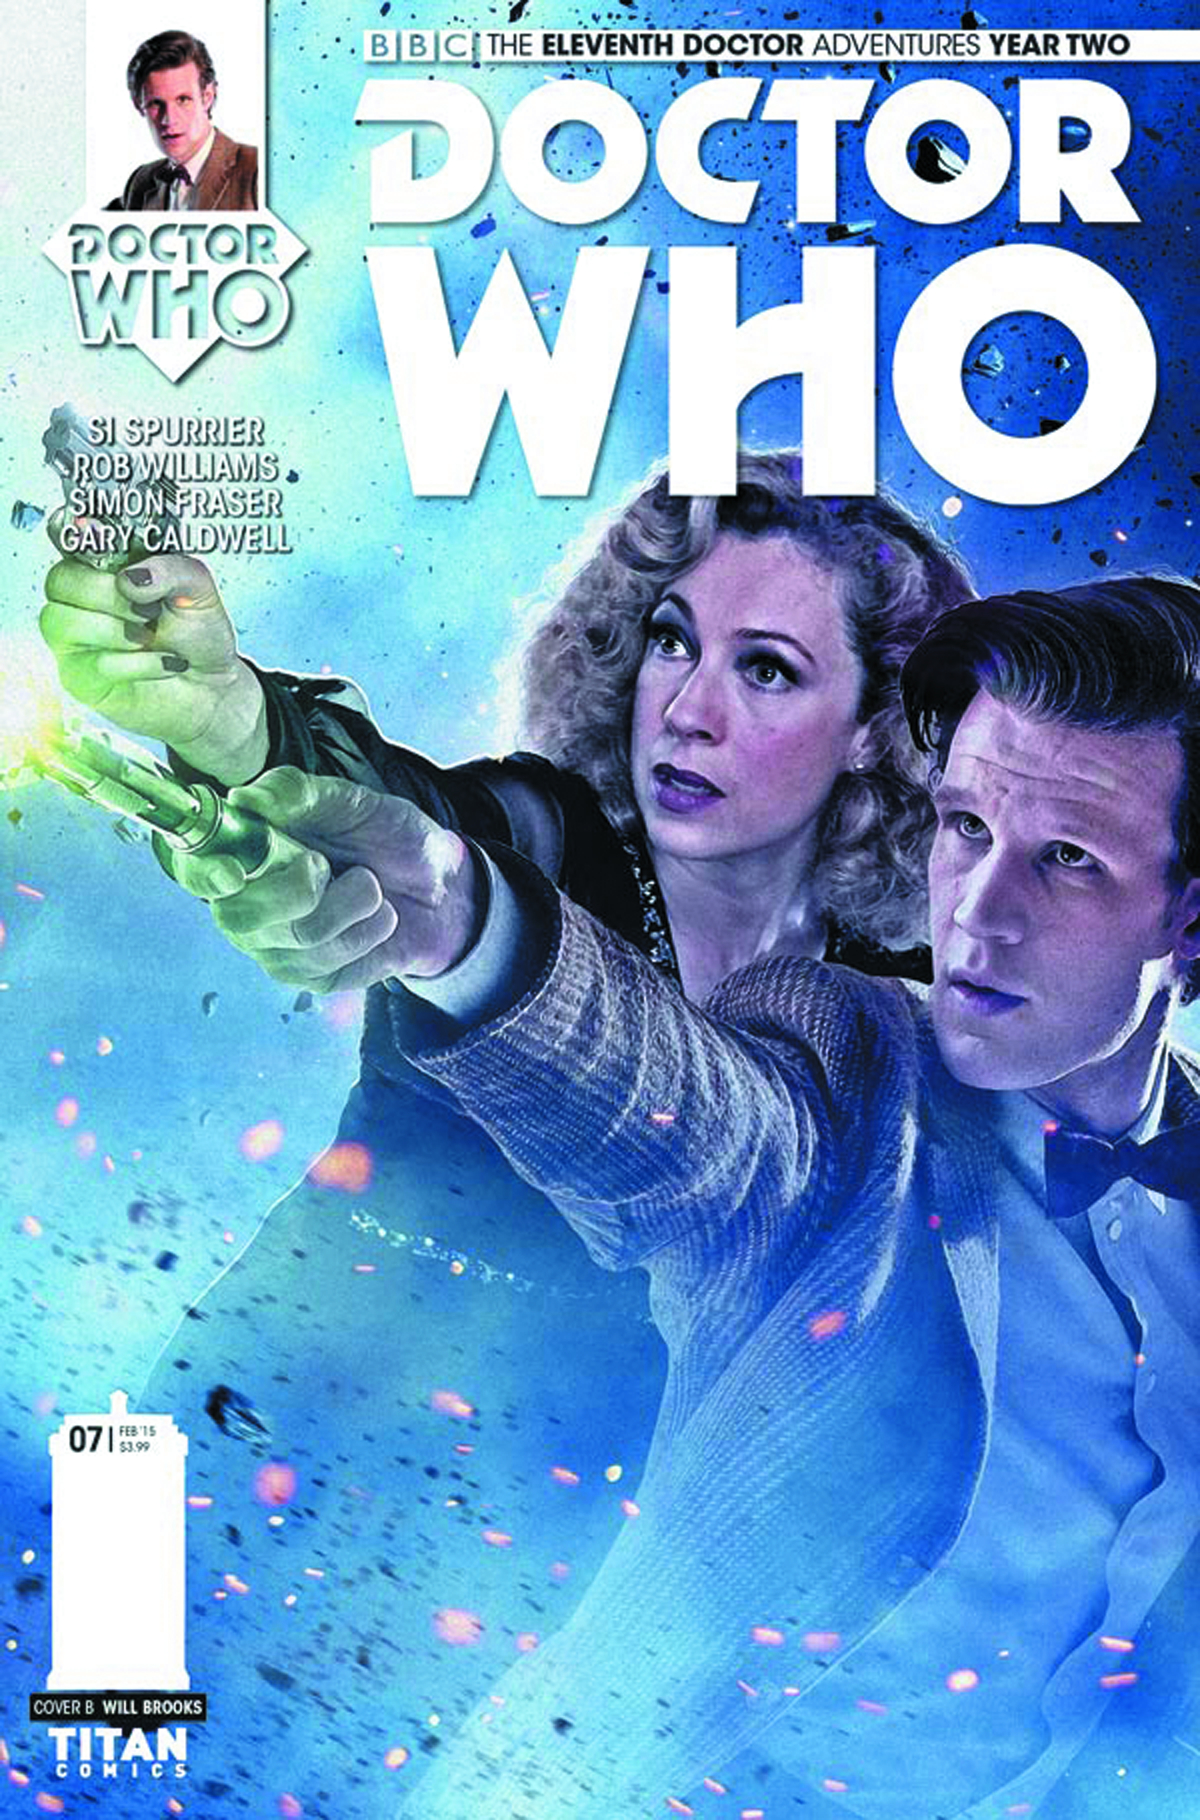 DOCTOR WHO 11TH YEAR TWO #7 CVR B PHOTO